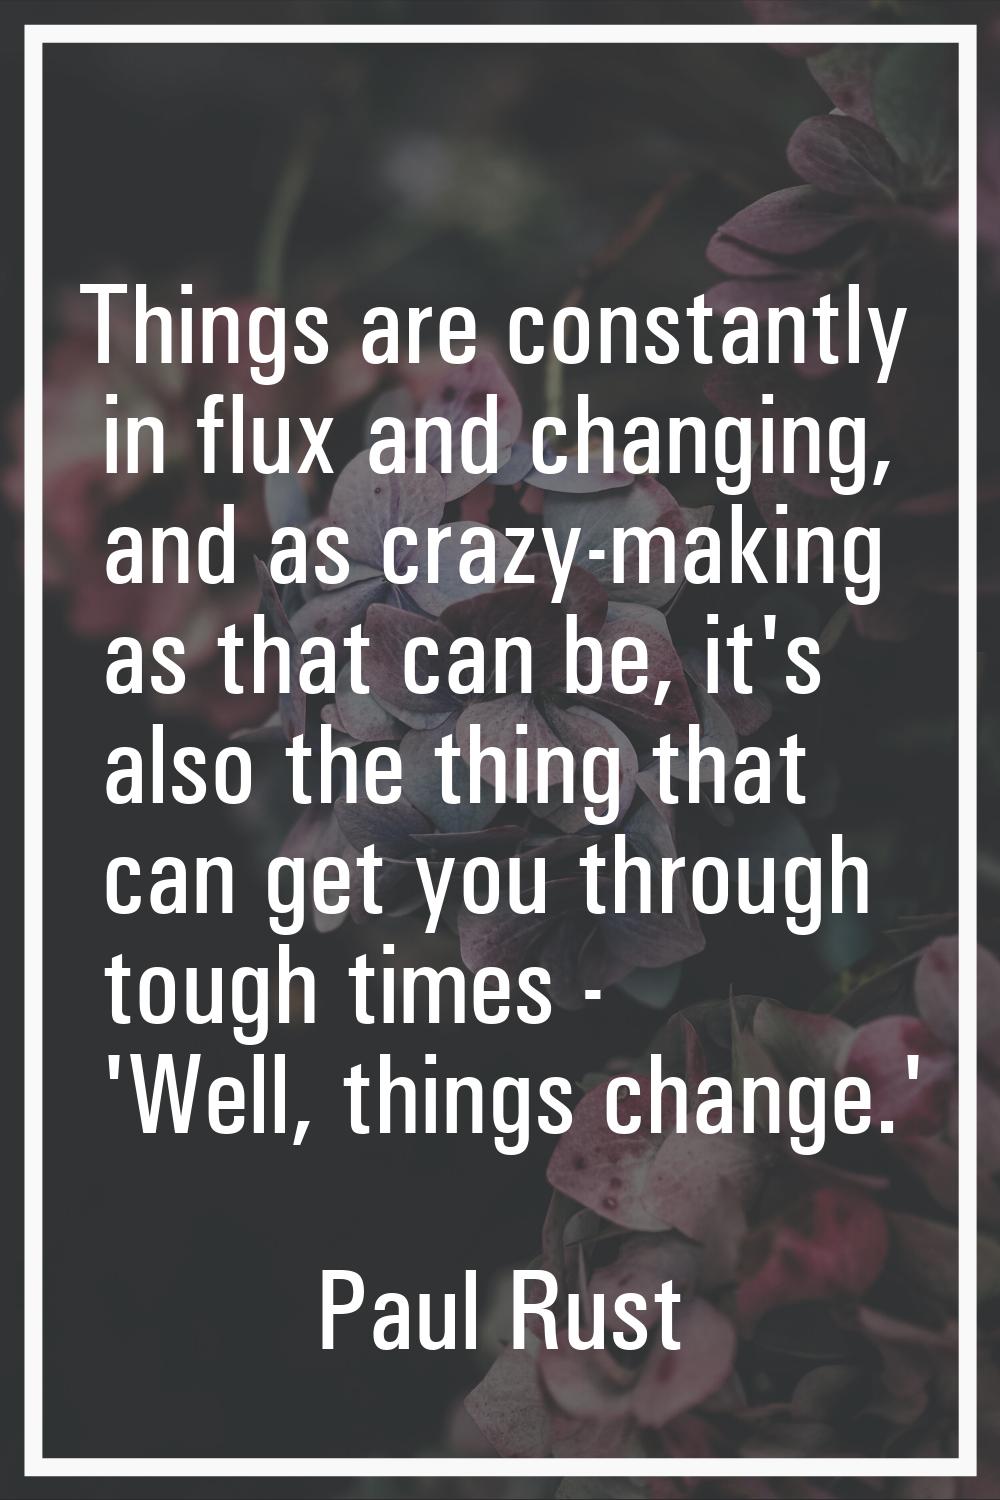 Things are constantly in flux and changing, and as crazy-making as that can be, it's also the thing